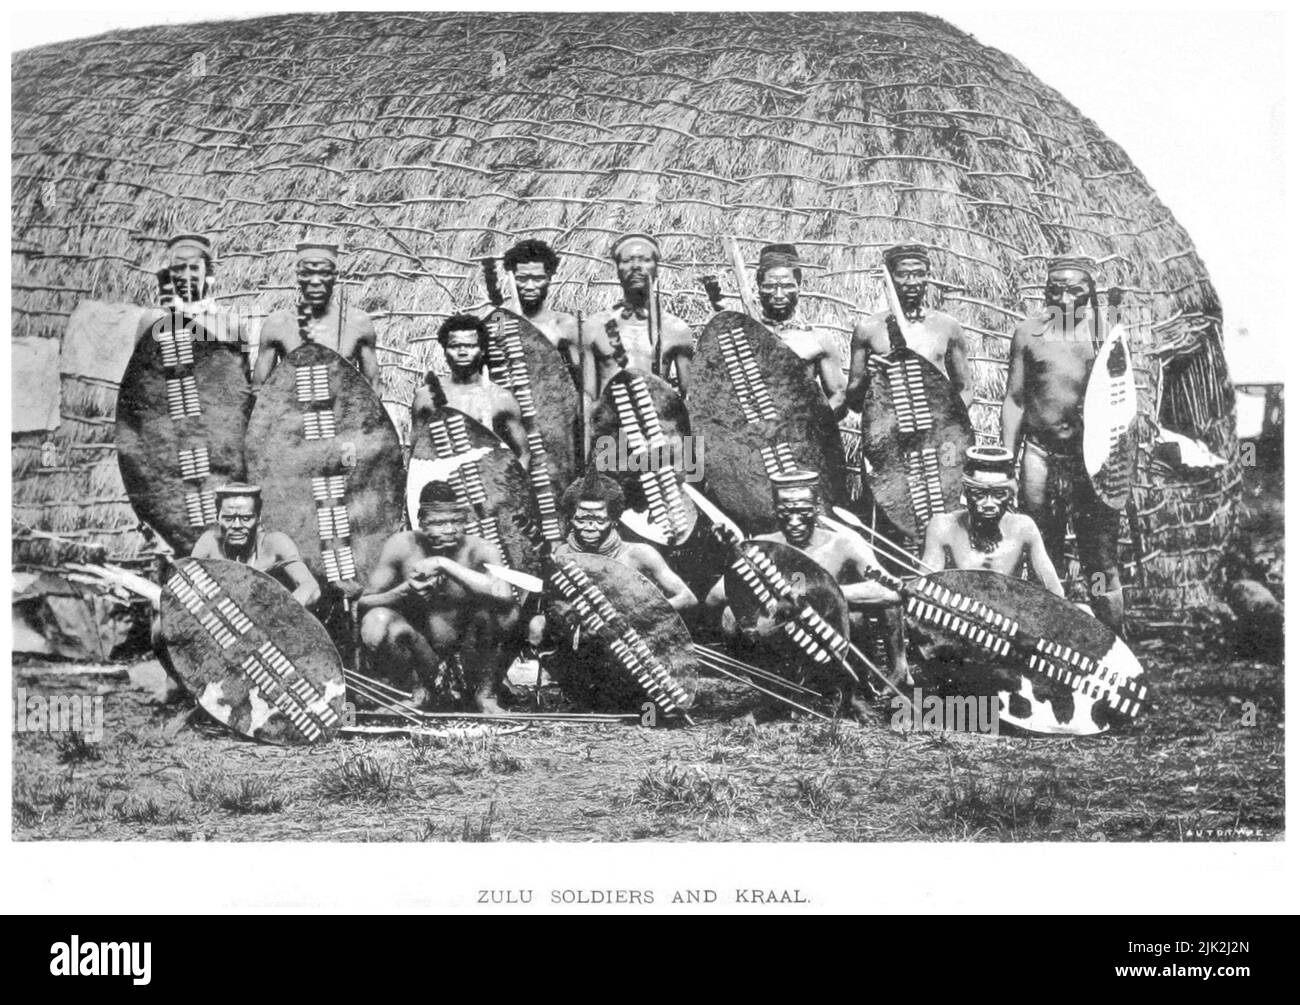 A group of Zulu warriors from 1882 at the time of the Anglo-Zulu wars Stock Photo